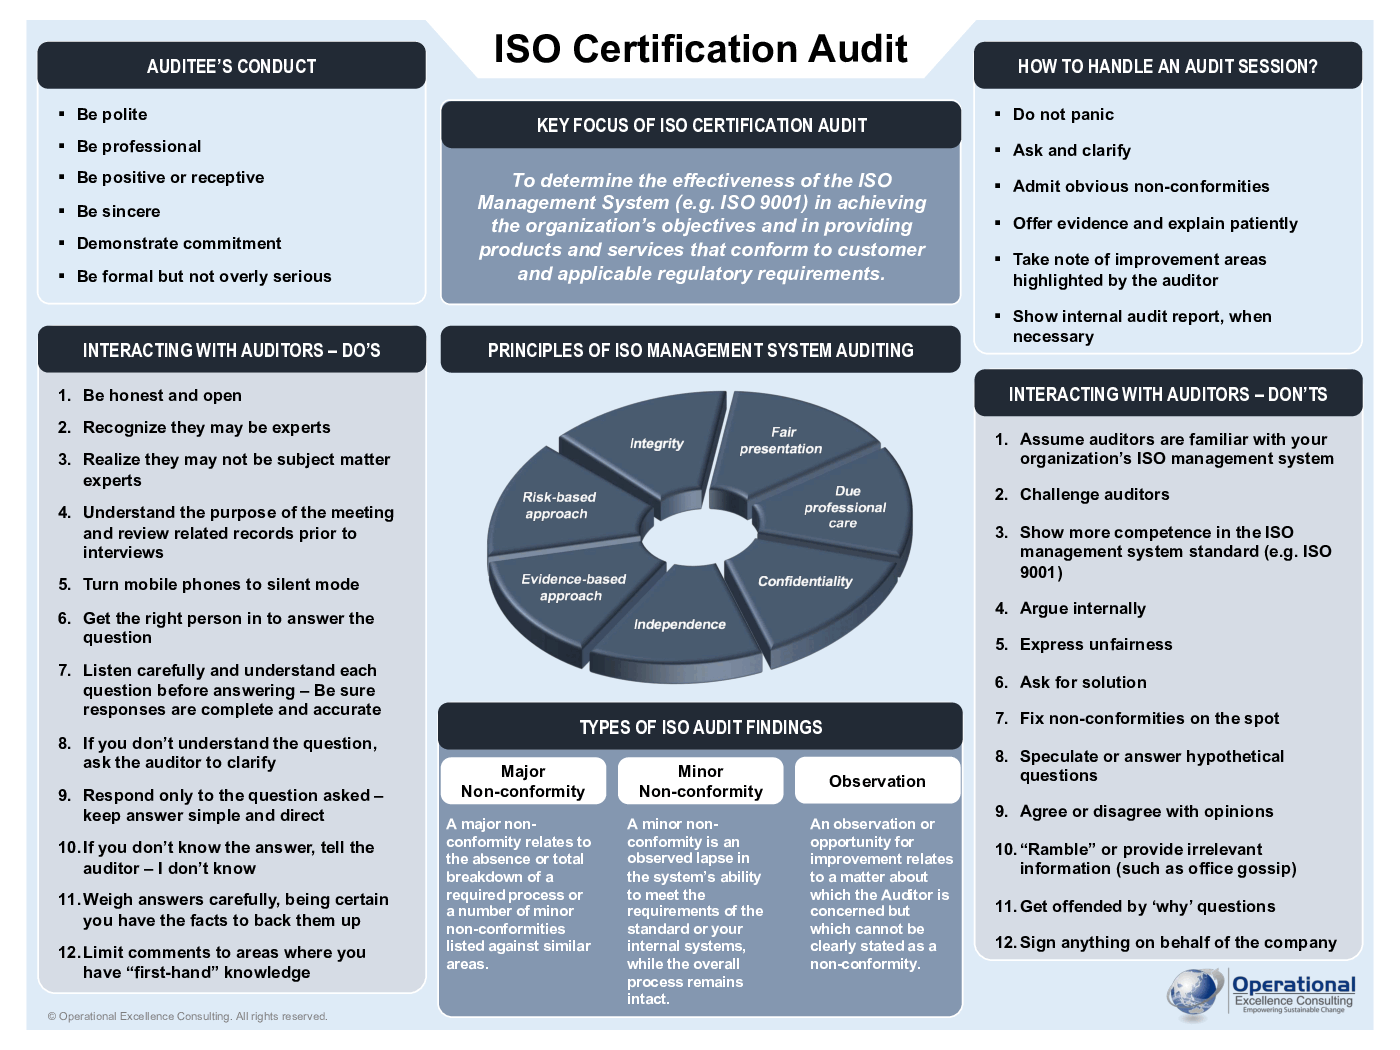 ISO Certification Audit Poster